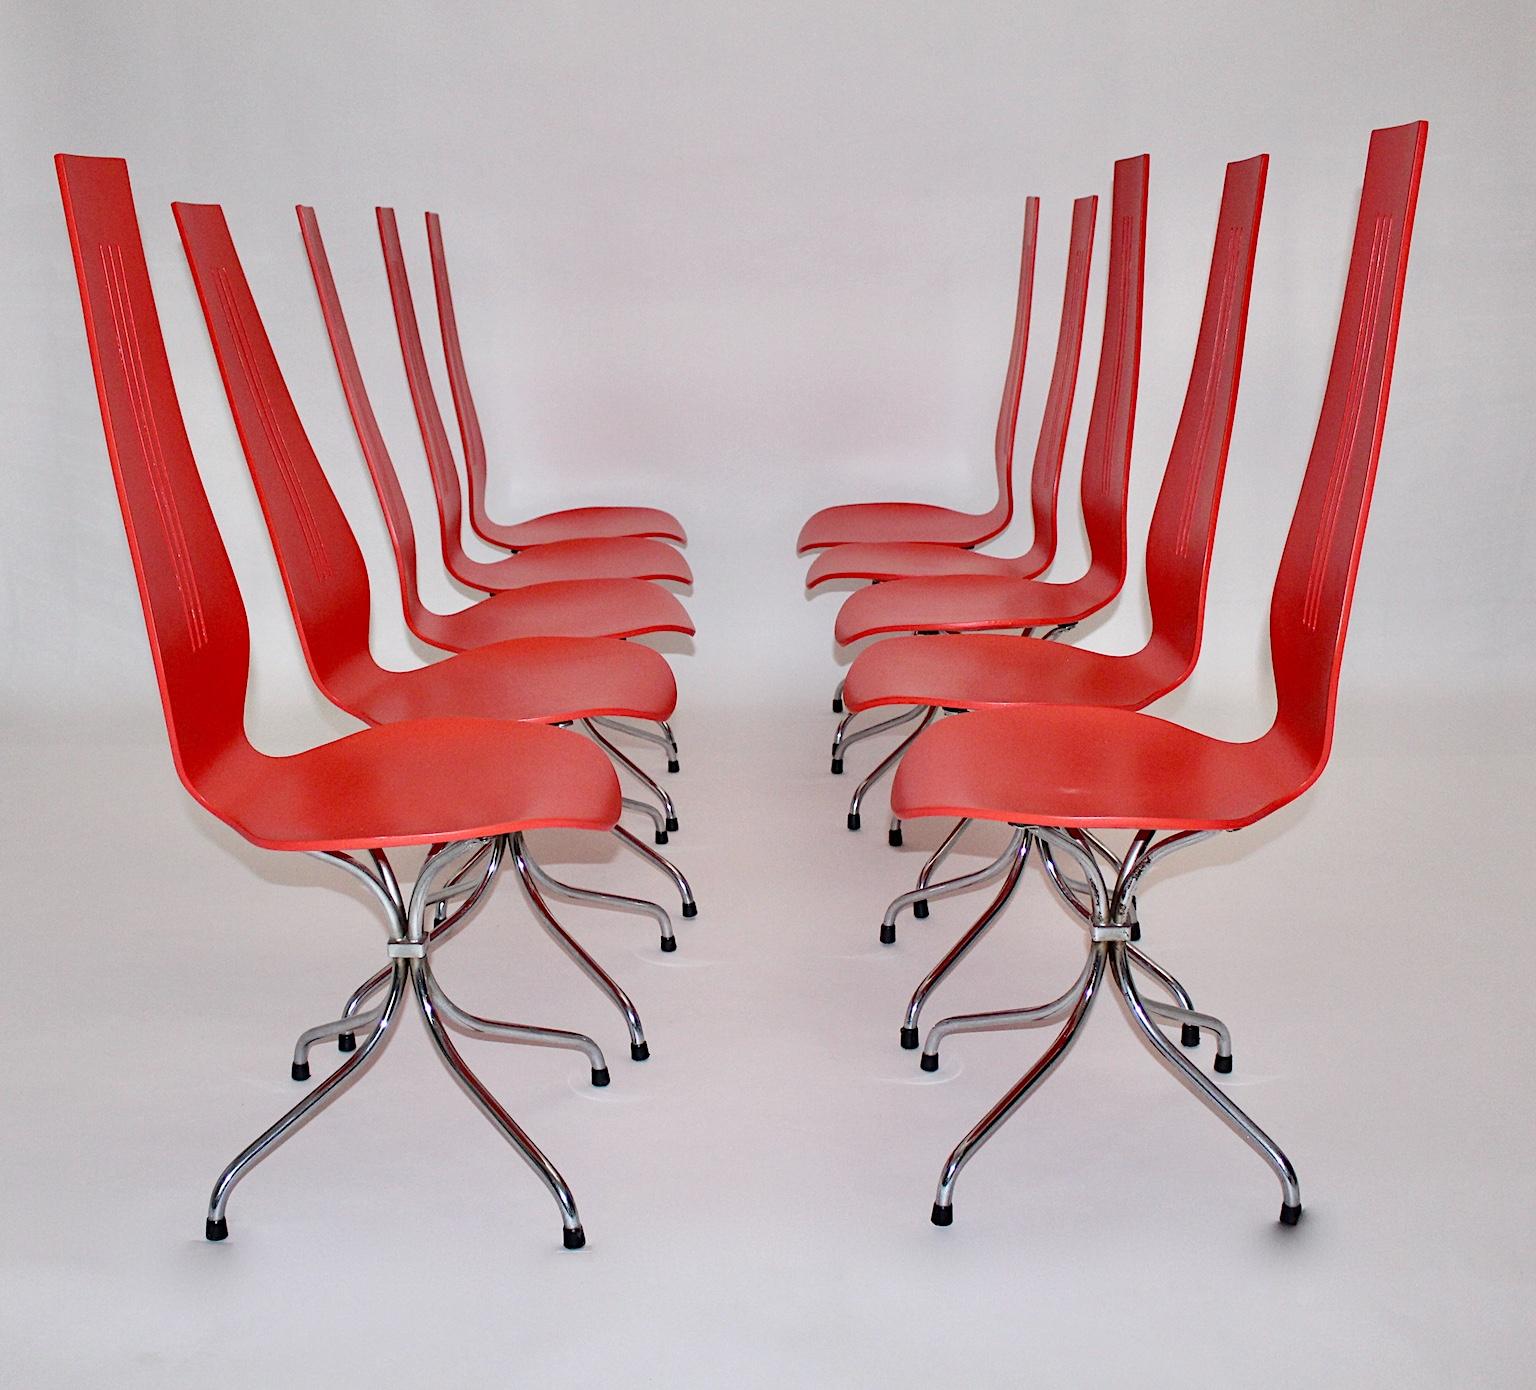 Mid Century Modern vintage dining chairs model chaise lyre by Theo Häberli 1960s.
The rare set of 10 vintage dining chairs show red lacquered plywood seats and chromed metal feet with black rubber sabots. 
The vintage dining chairs are characterized